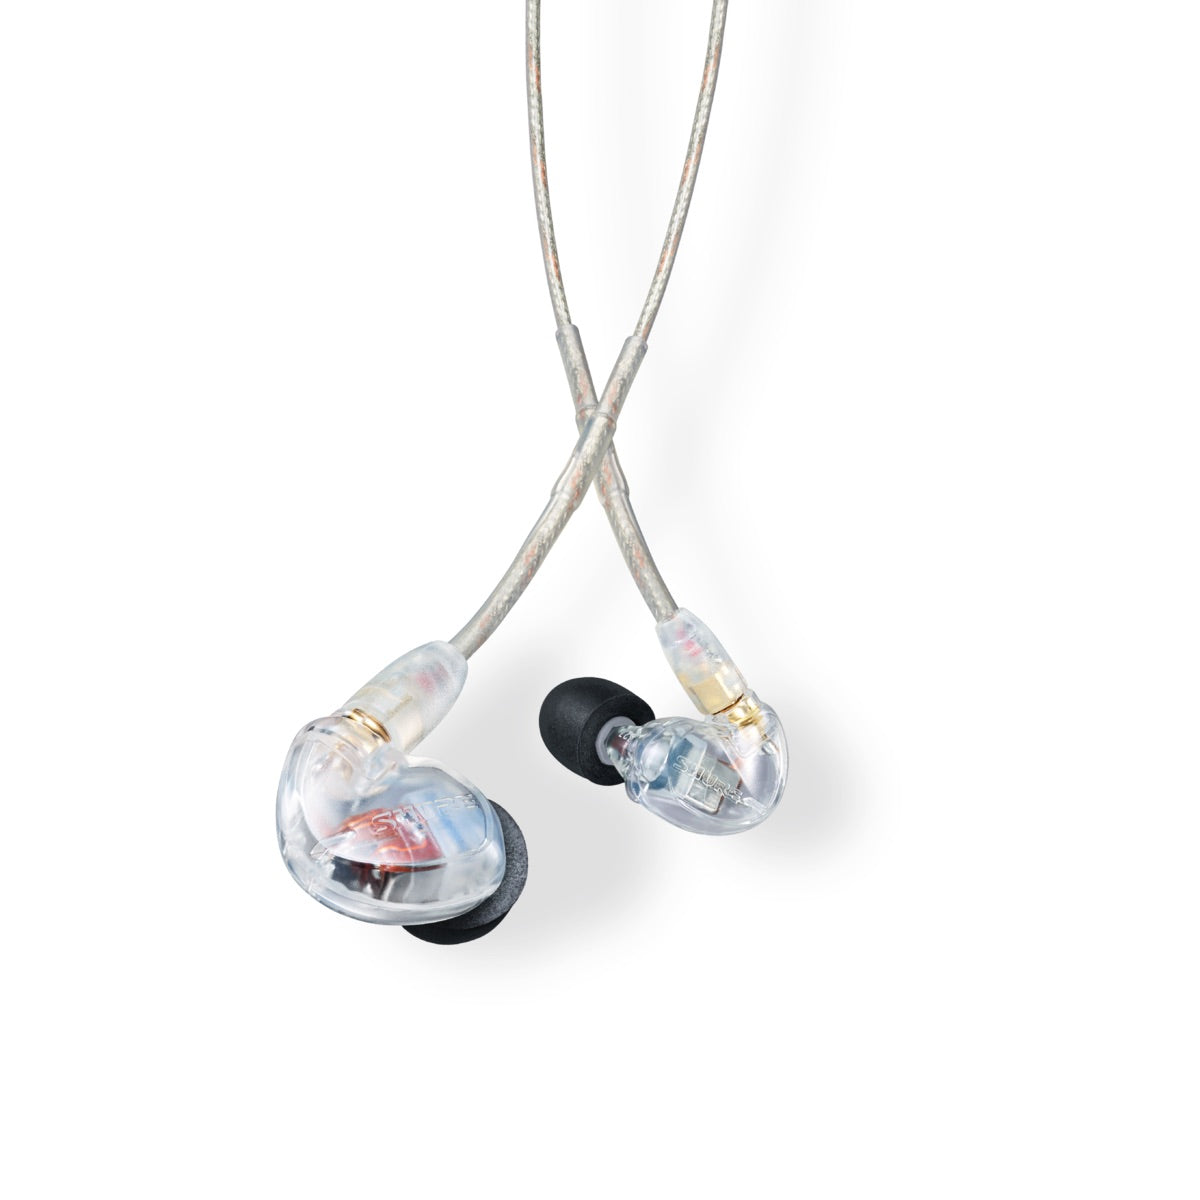 Shure SE215-CL Sound-Isolating In-Ear Stereo Earphones (Clear)